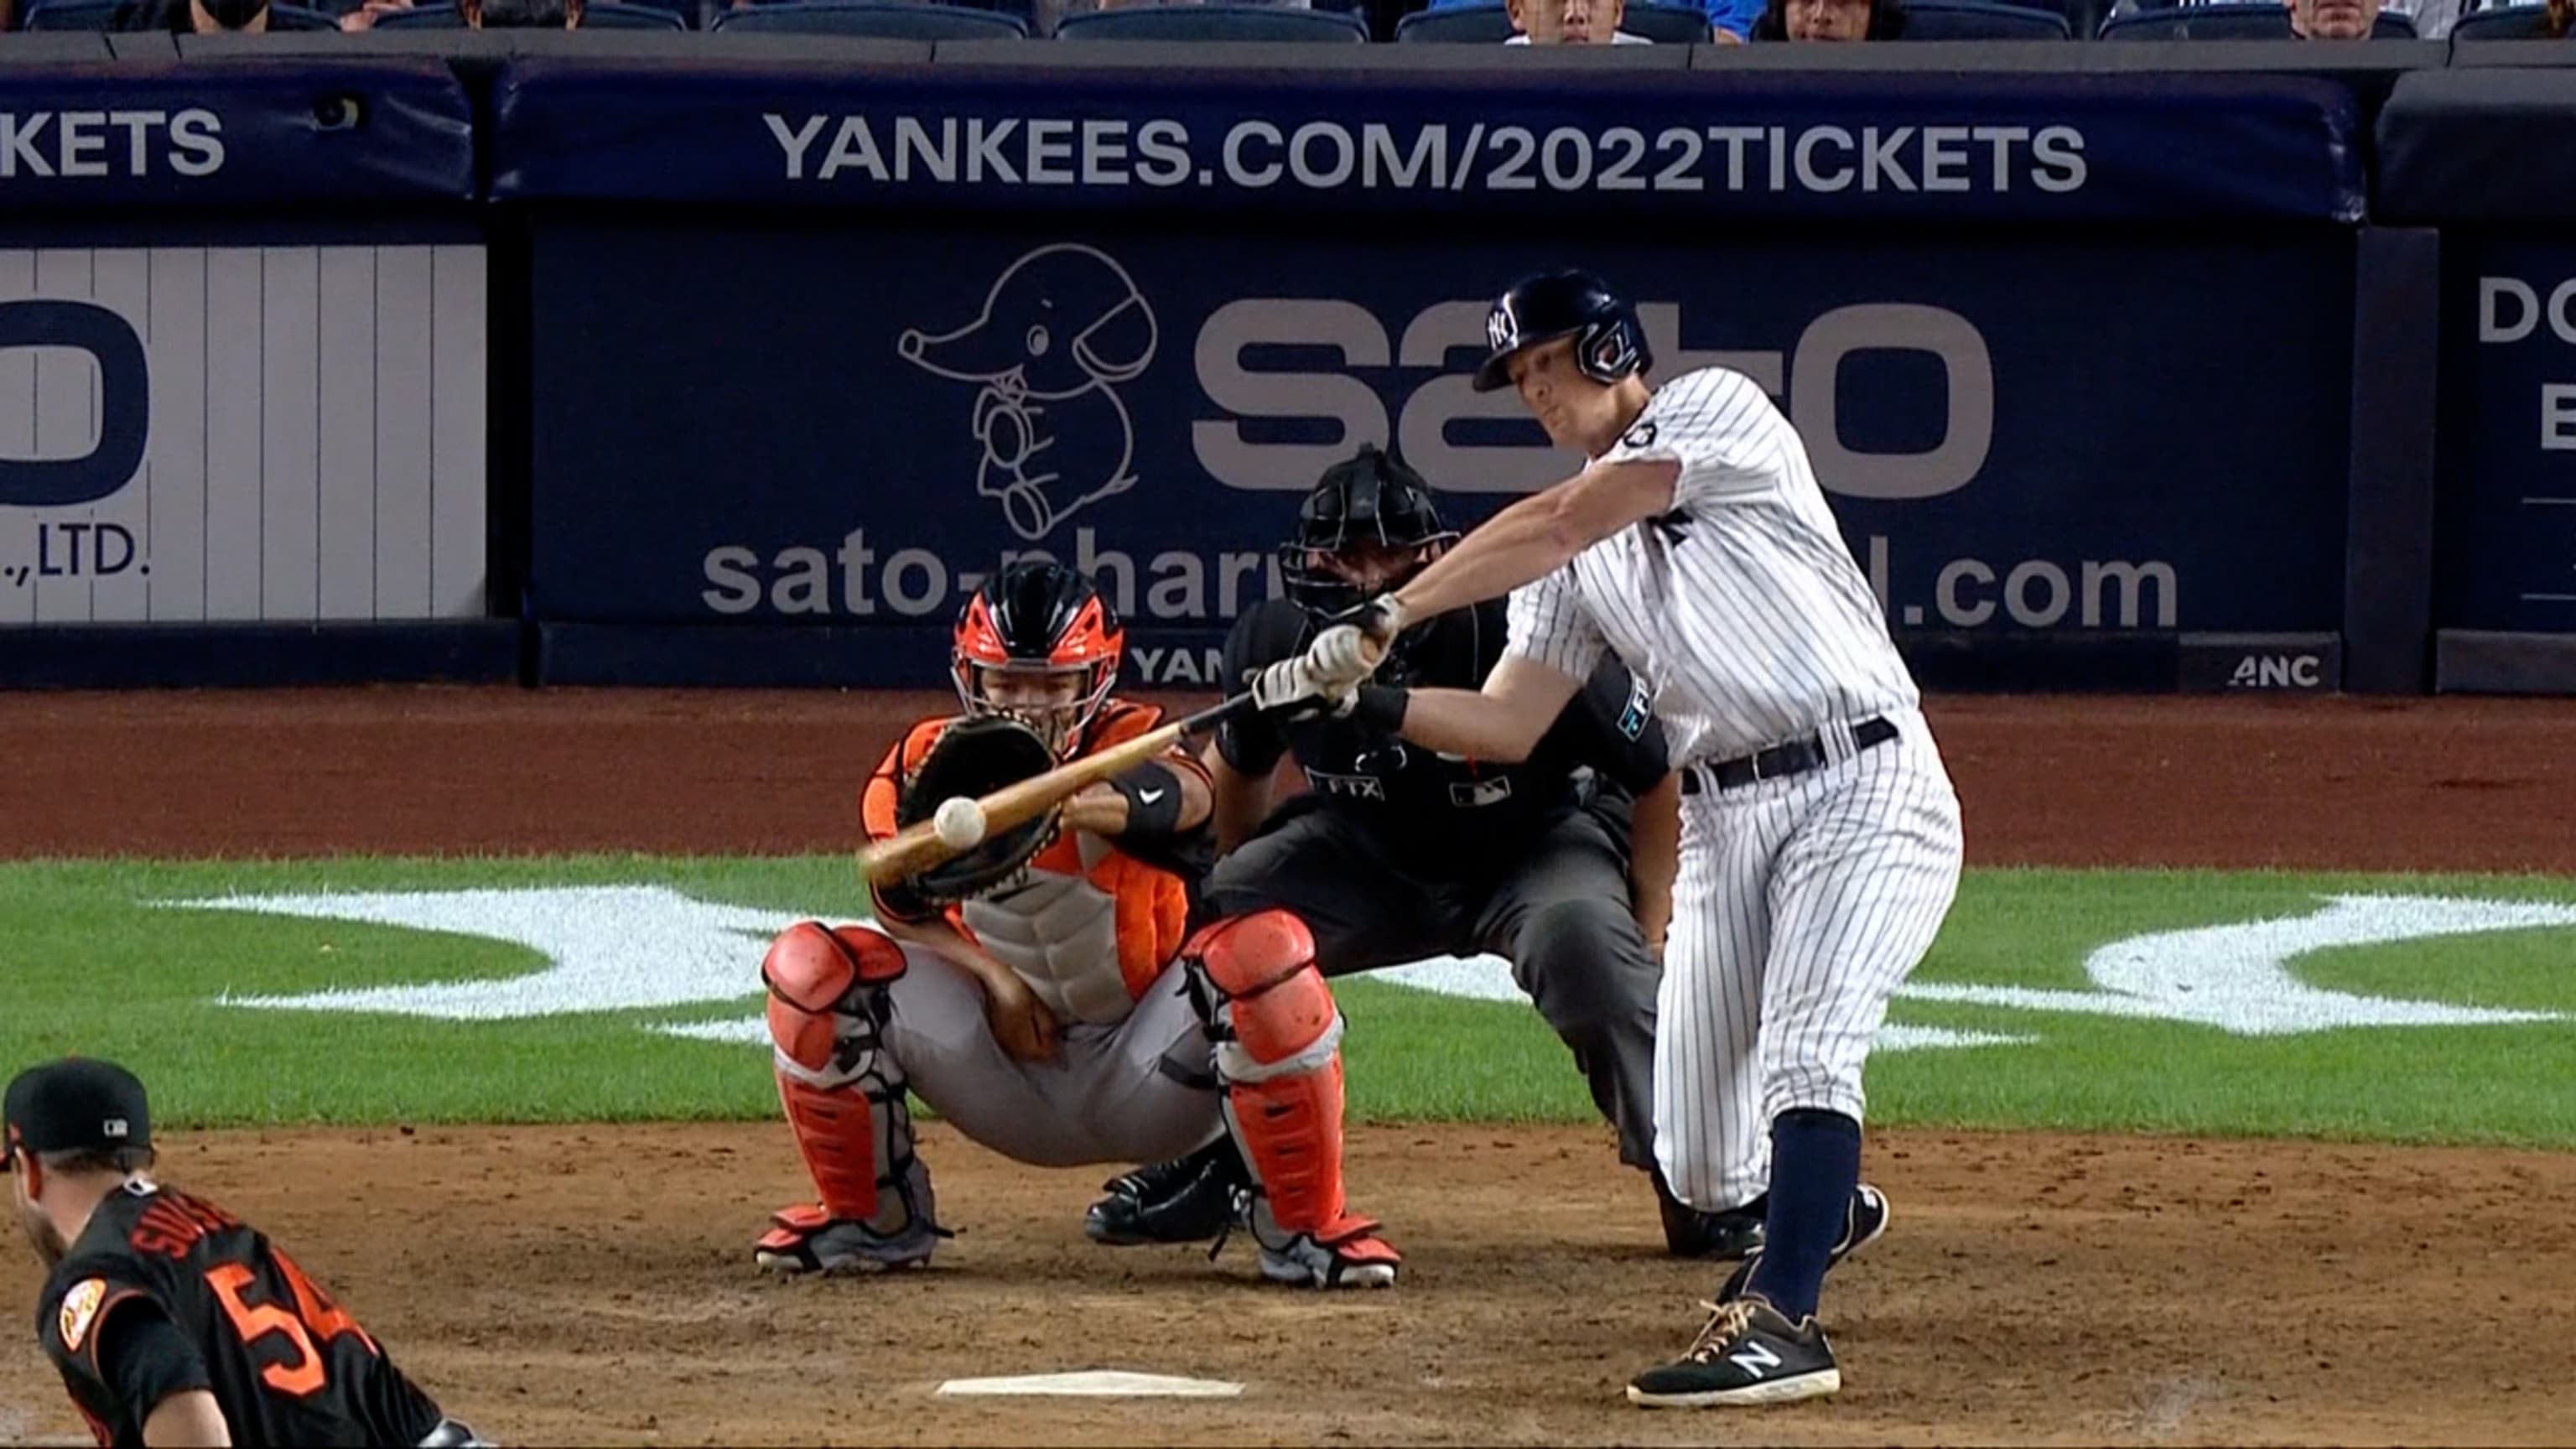 New York Yankees fans react to former star catcher Gary Sanchez being  released by the San Francisco Giants: Your new Yankees left fielder